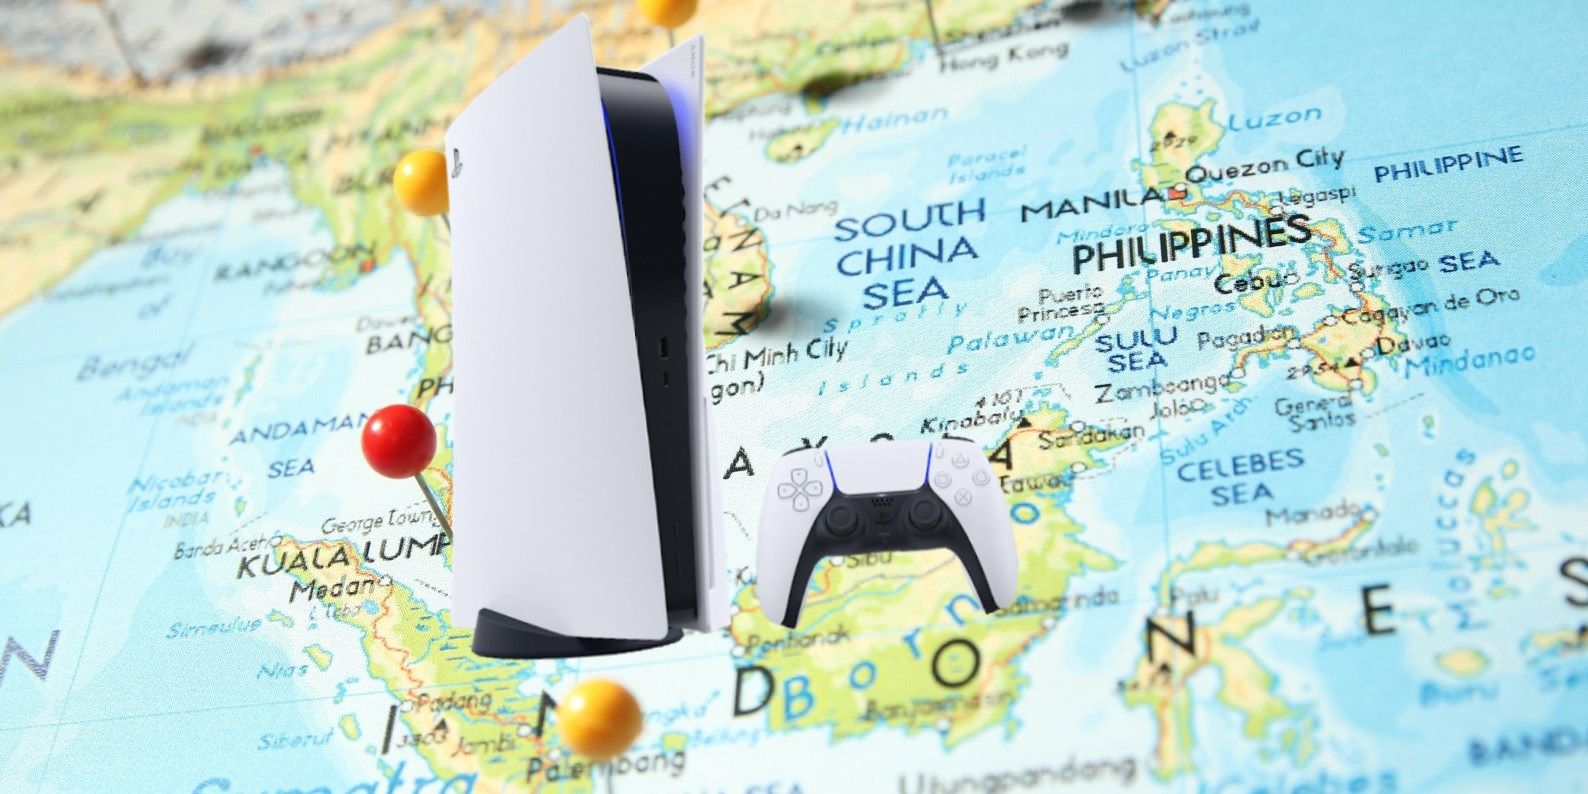 A PlayStation 5 console on top of a map of Southeast Asia.